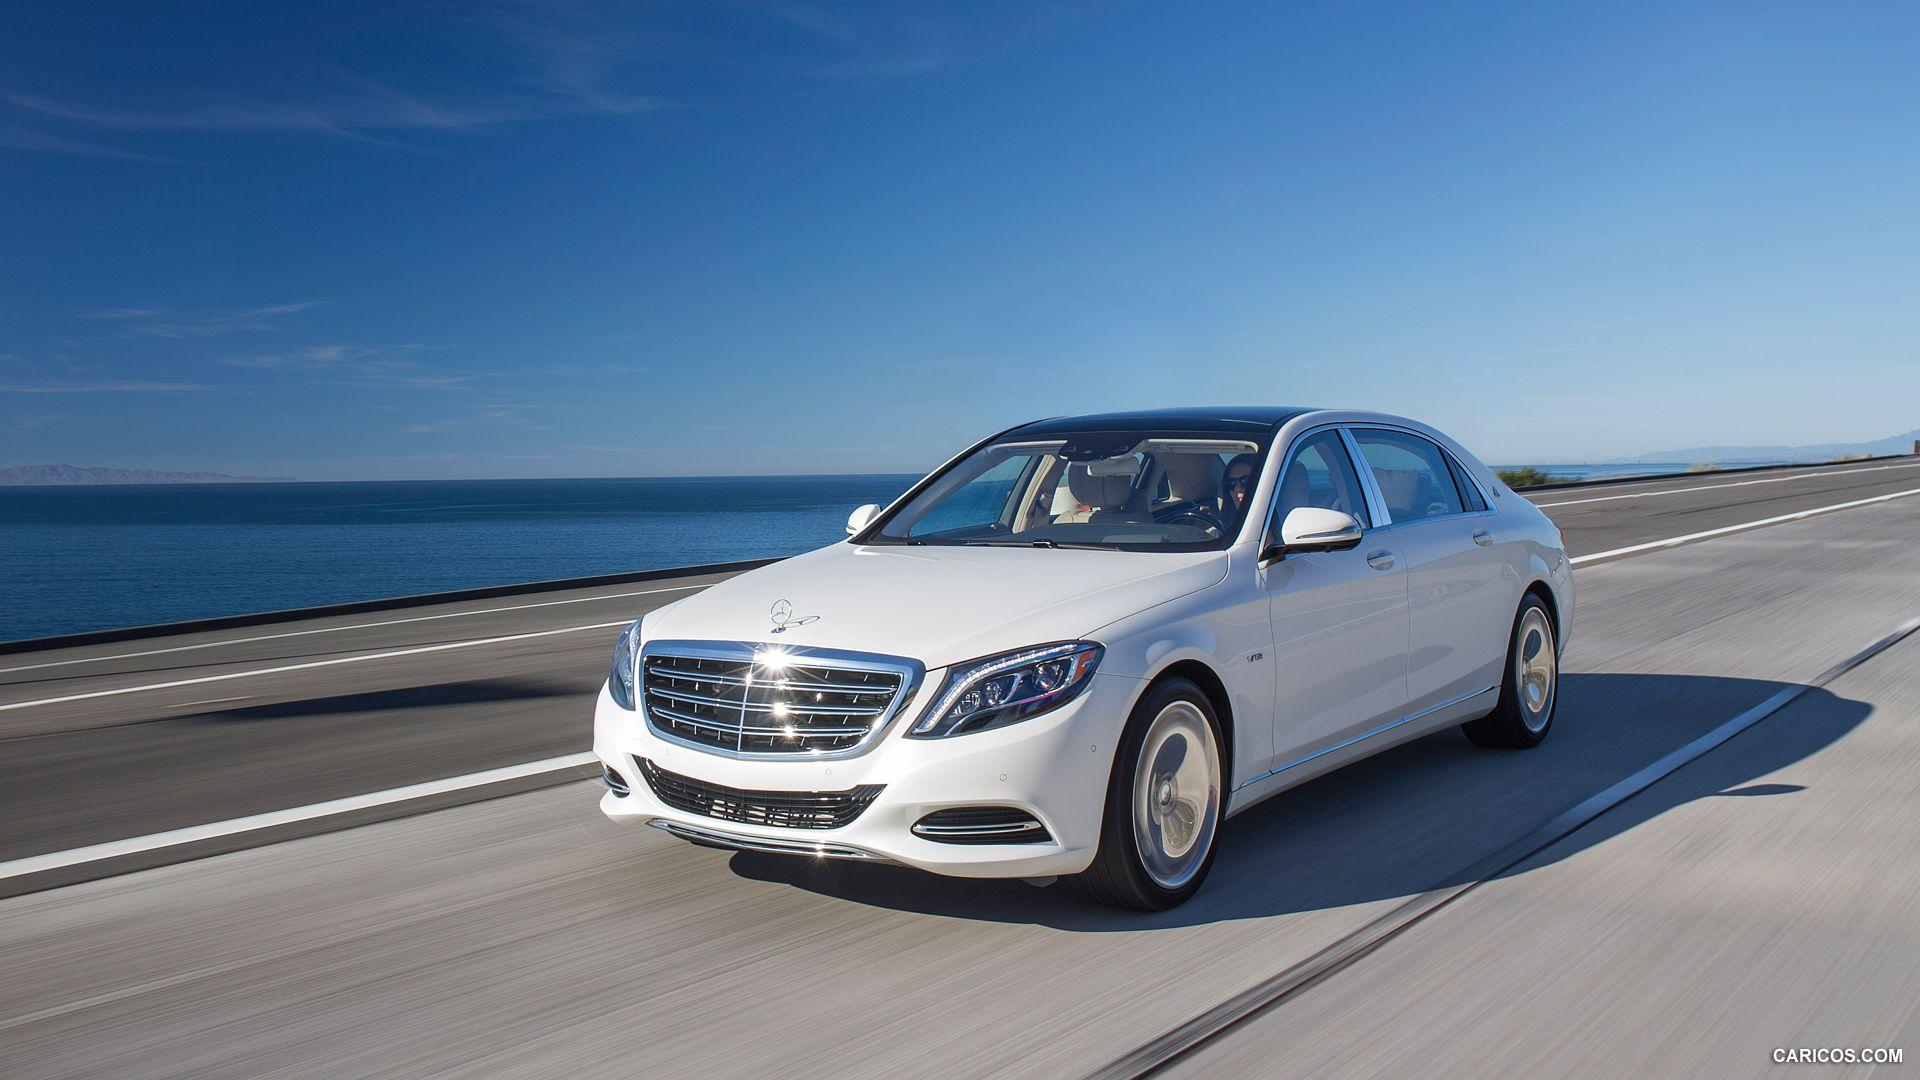 Mercedes Maybach S600 HD Wallpaper Free Download. Download